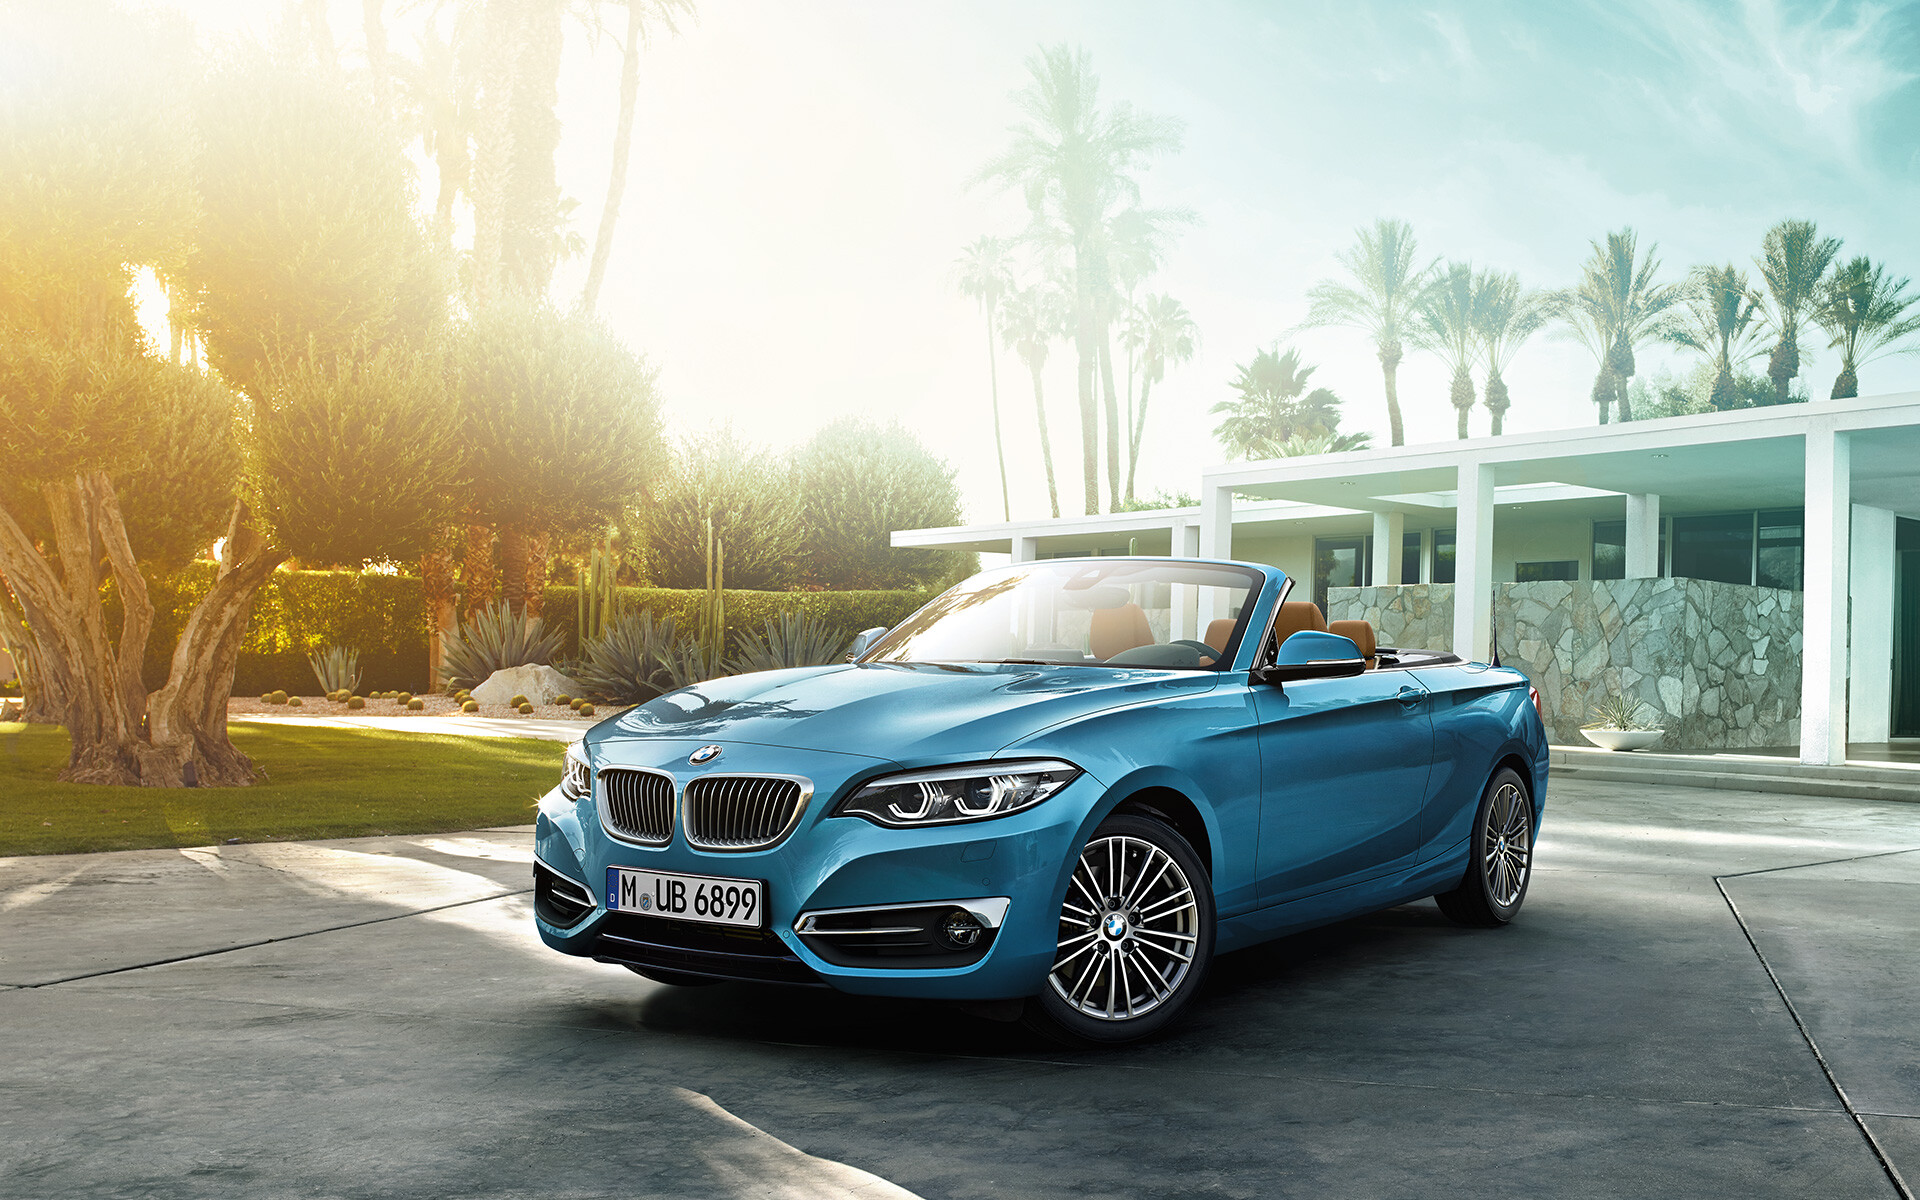 BMW 2 Series: Convertible, M240i, A twin kidney grille. 1920x1200 HD Background.